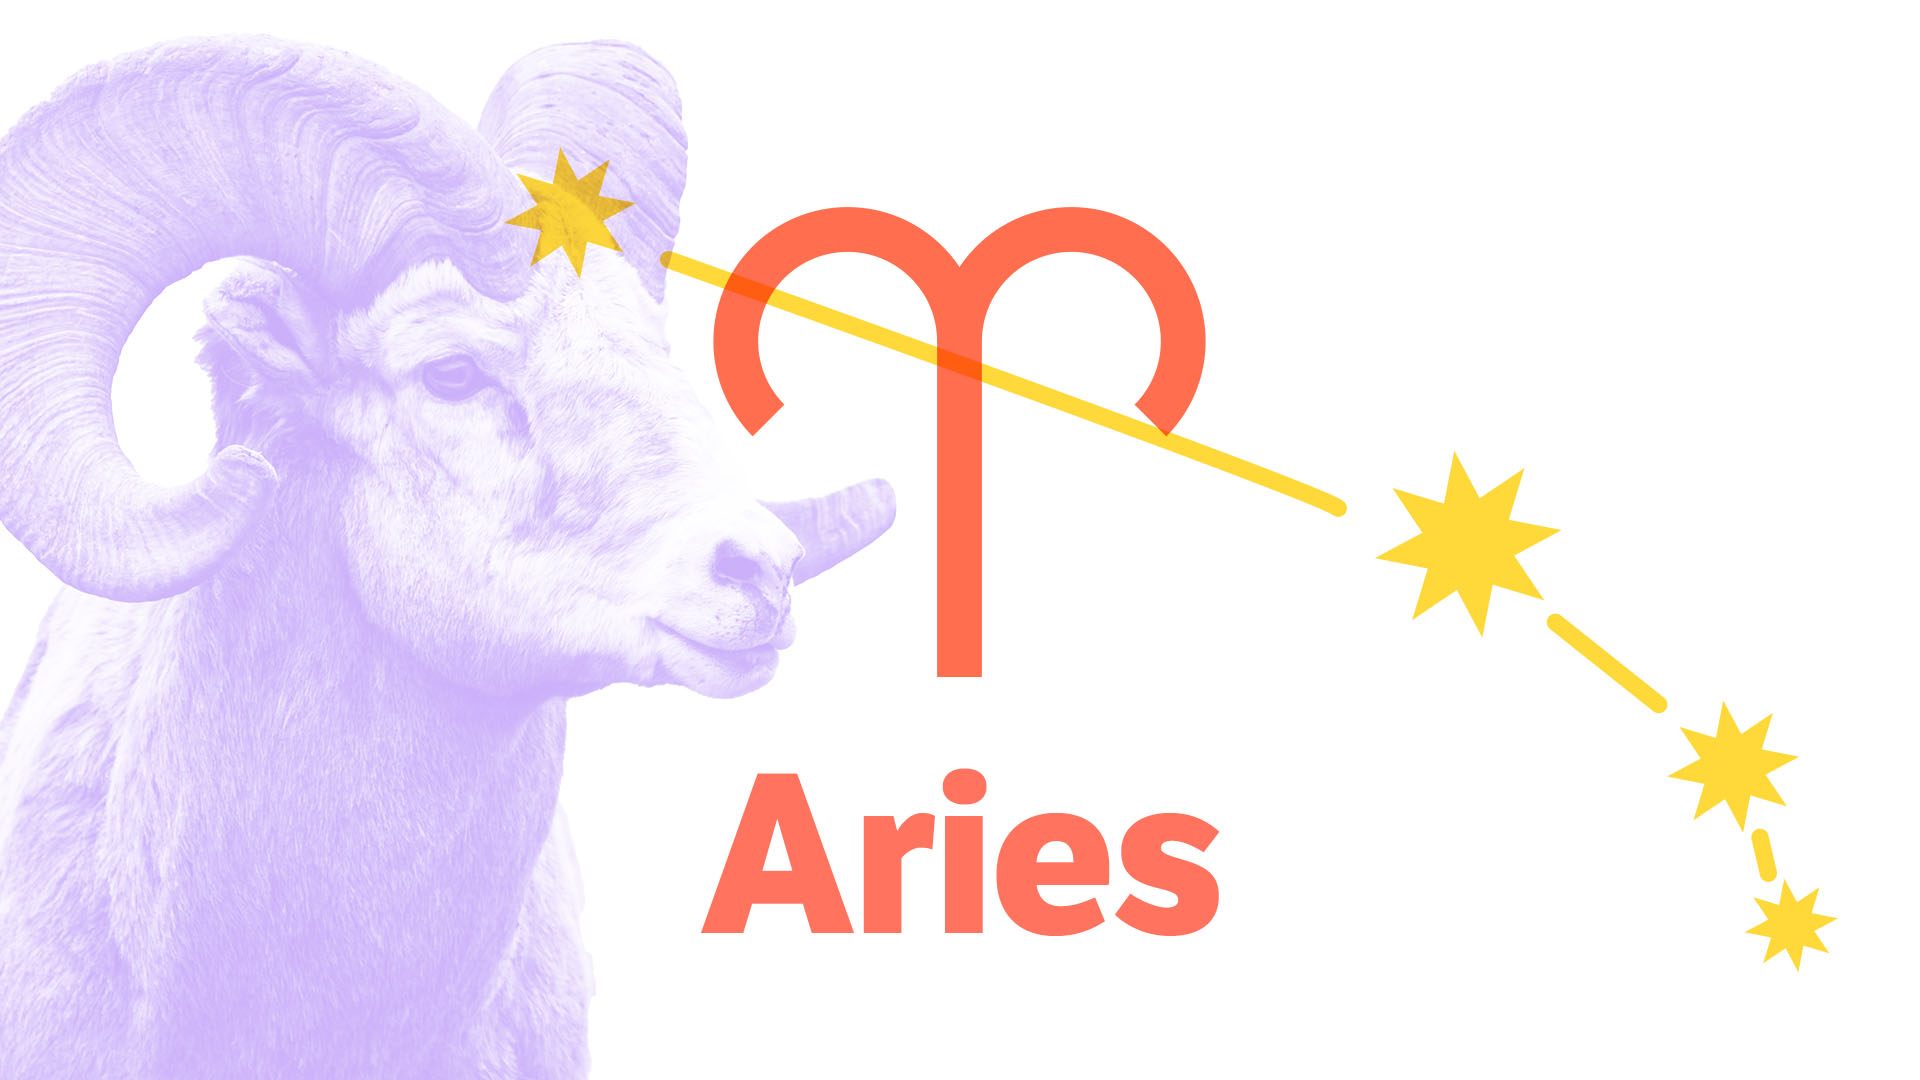 "Ardent" Or "Pugnacious"? What Words Best Describe Aries?